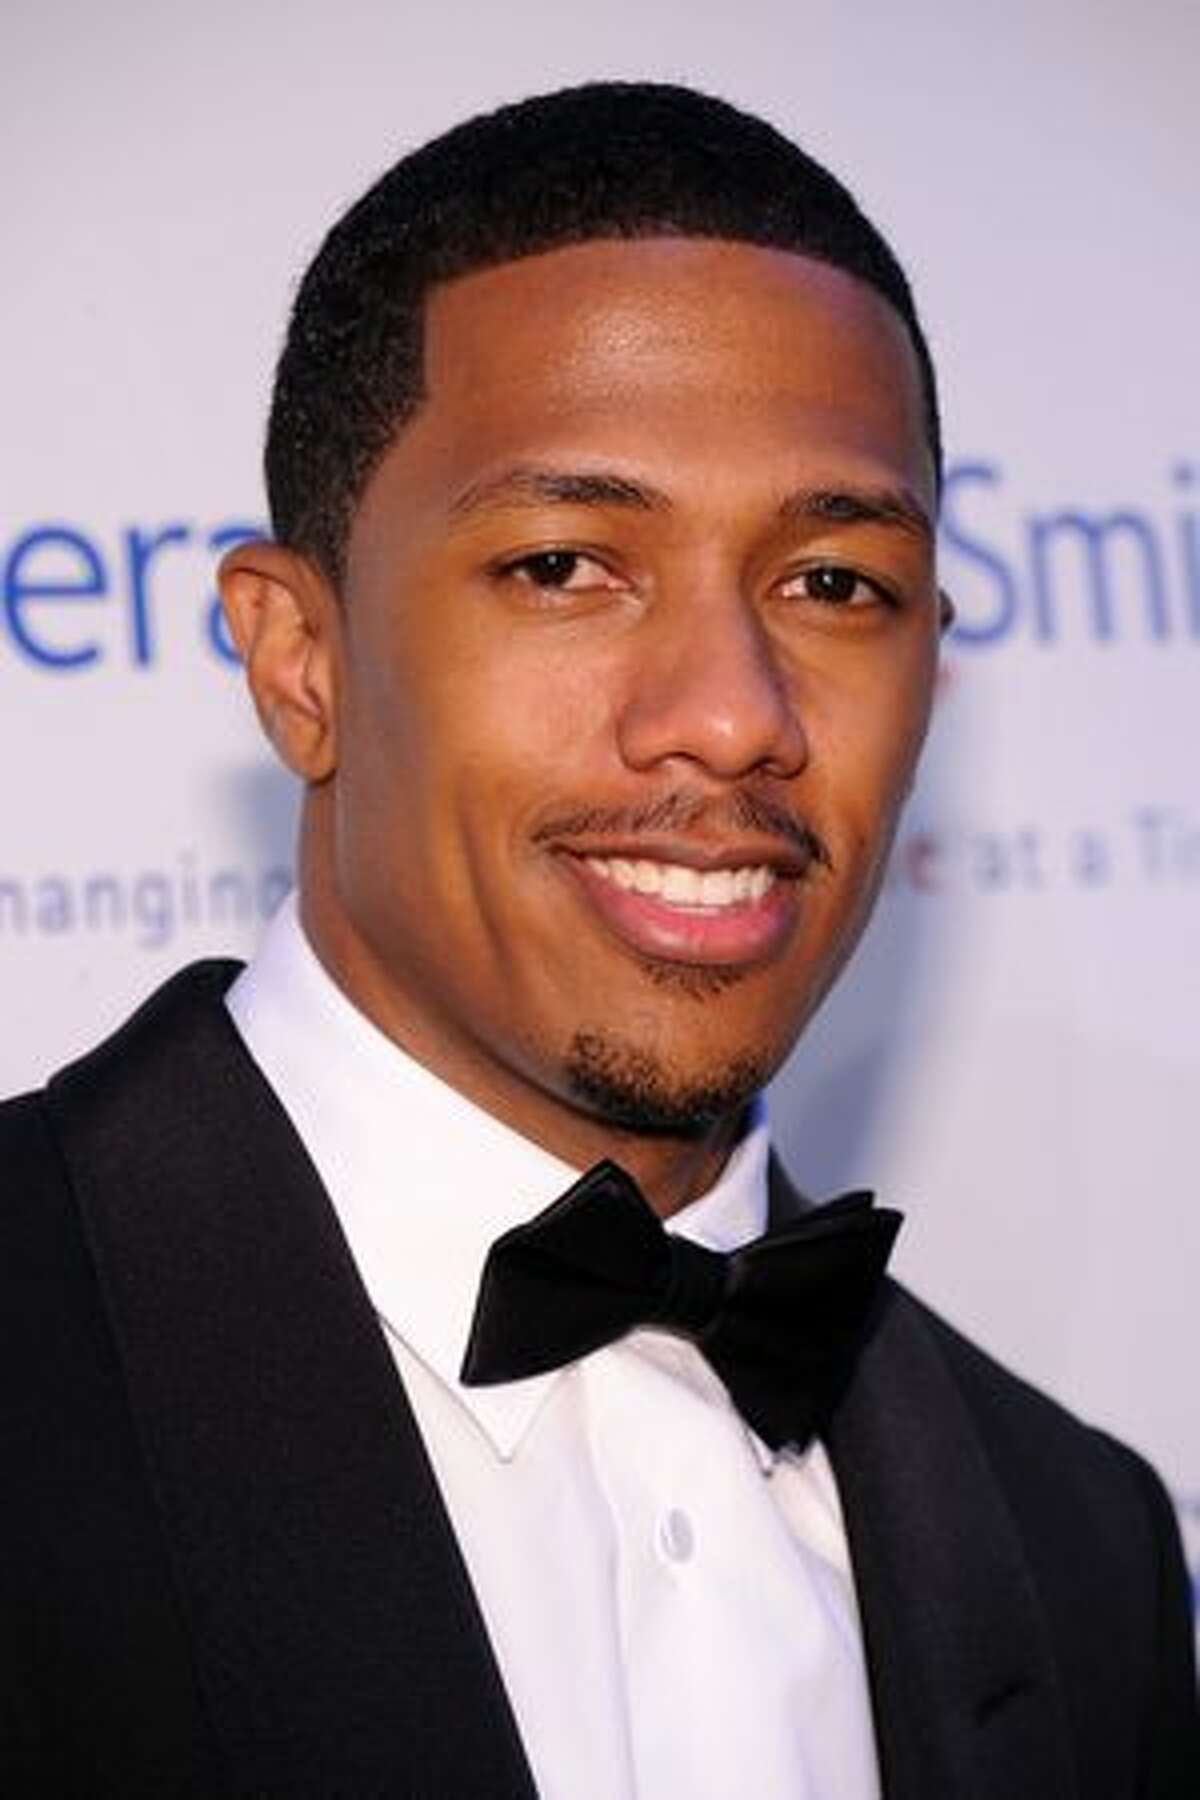 Actor Nick Cannon attends the 2010 Operation Smile annual gala at Cipriani, Wall Street on May 6, 2010 in New York City.